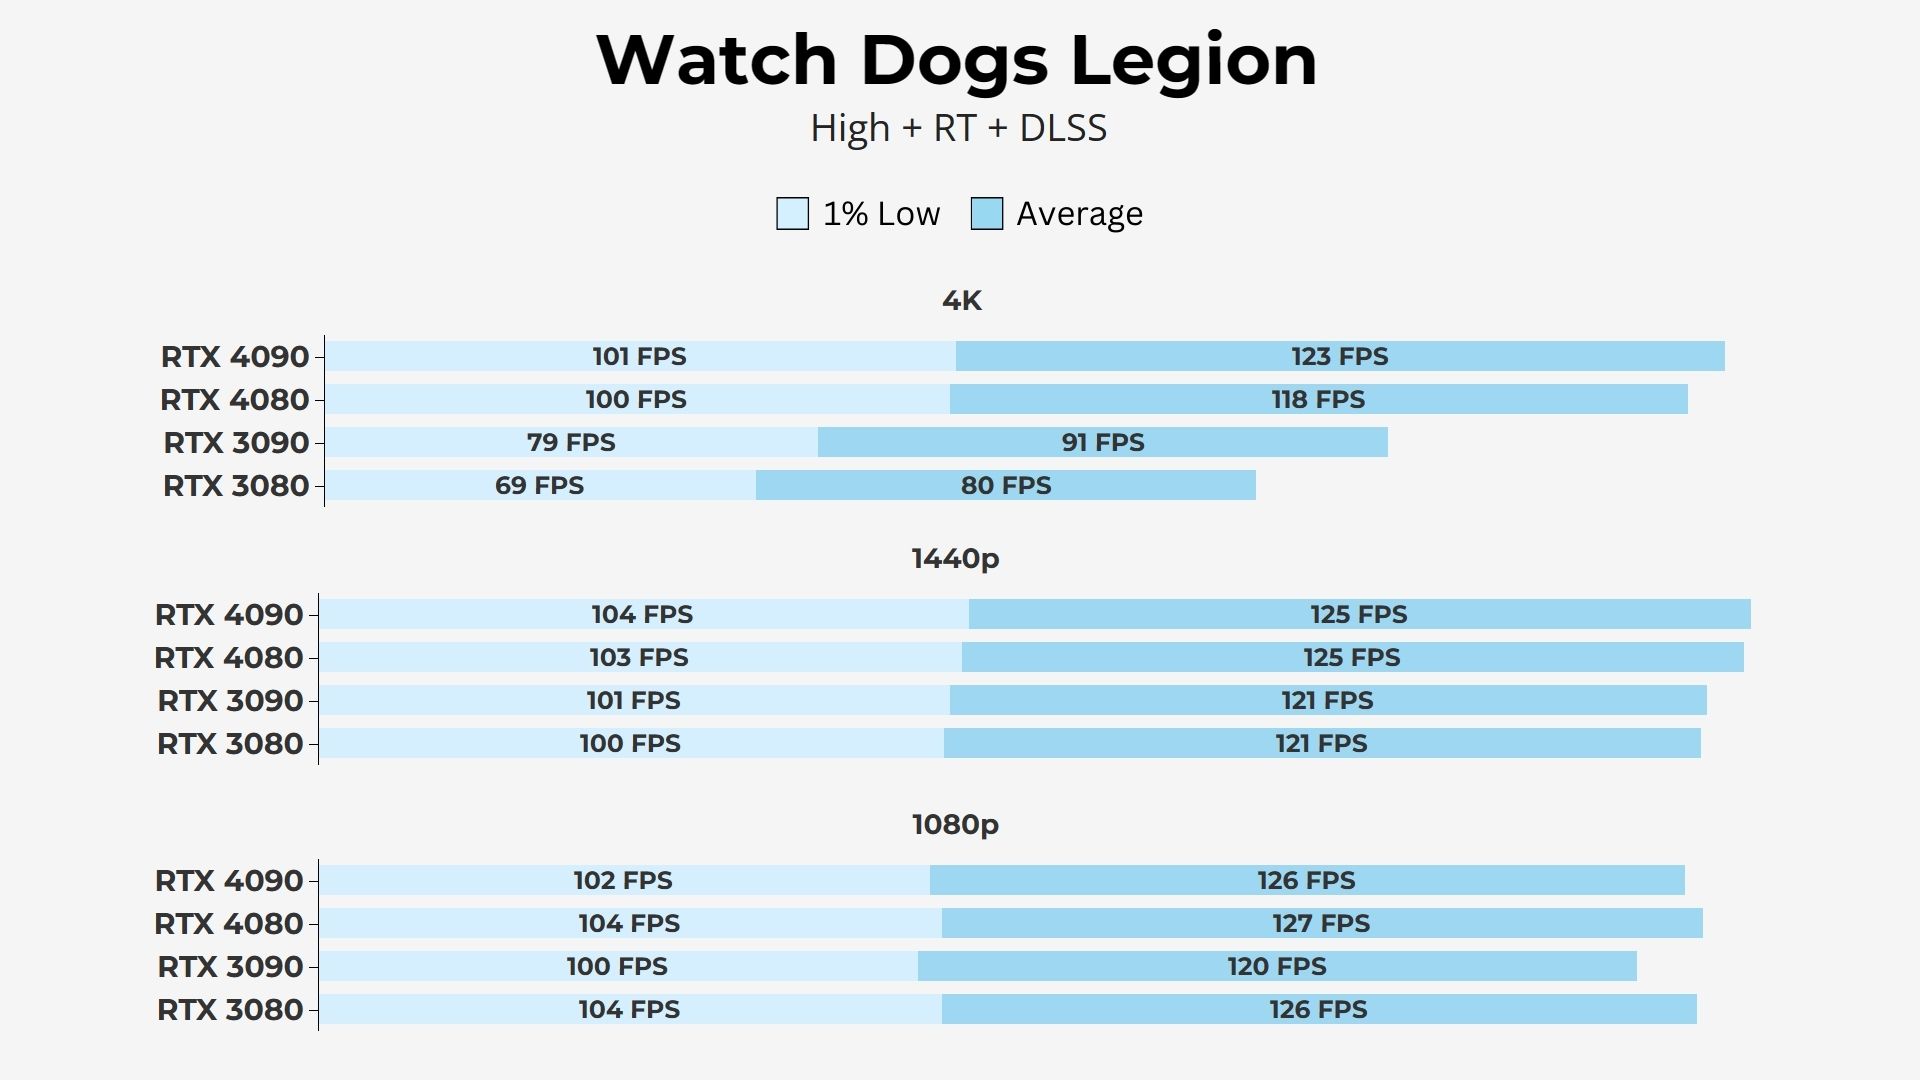 RTX 4080 Ray Tracing + DLSS Enabled Results watch dogs legion